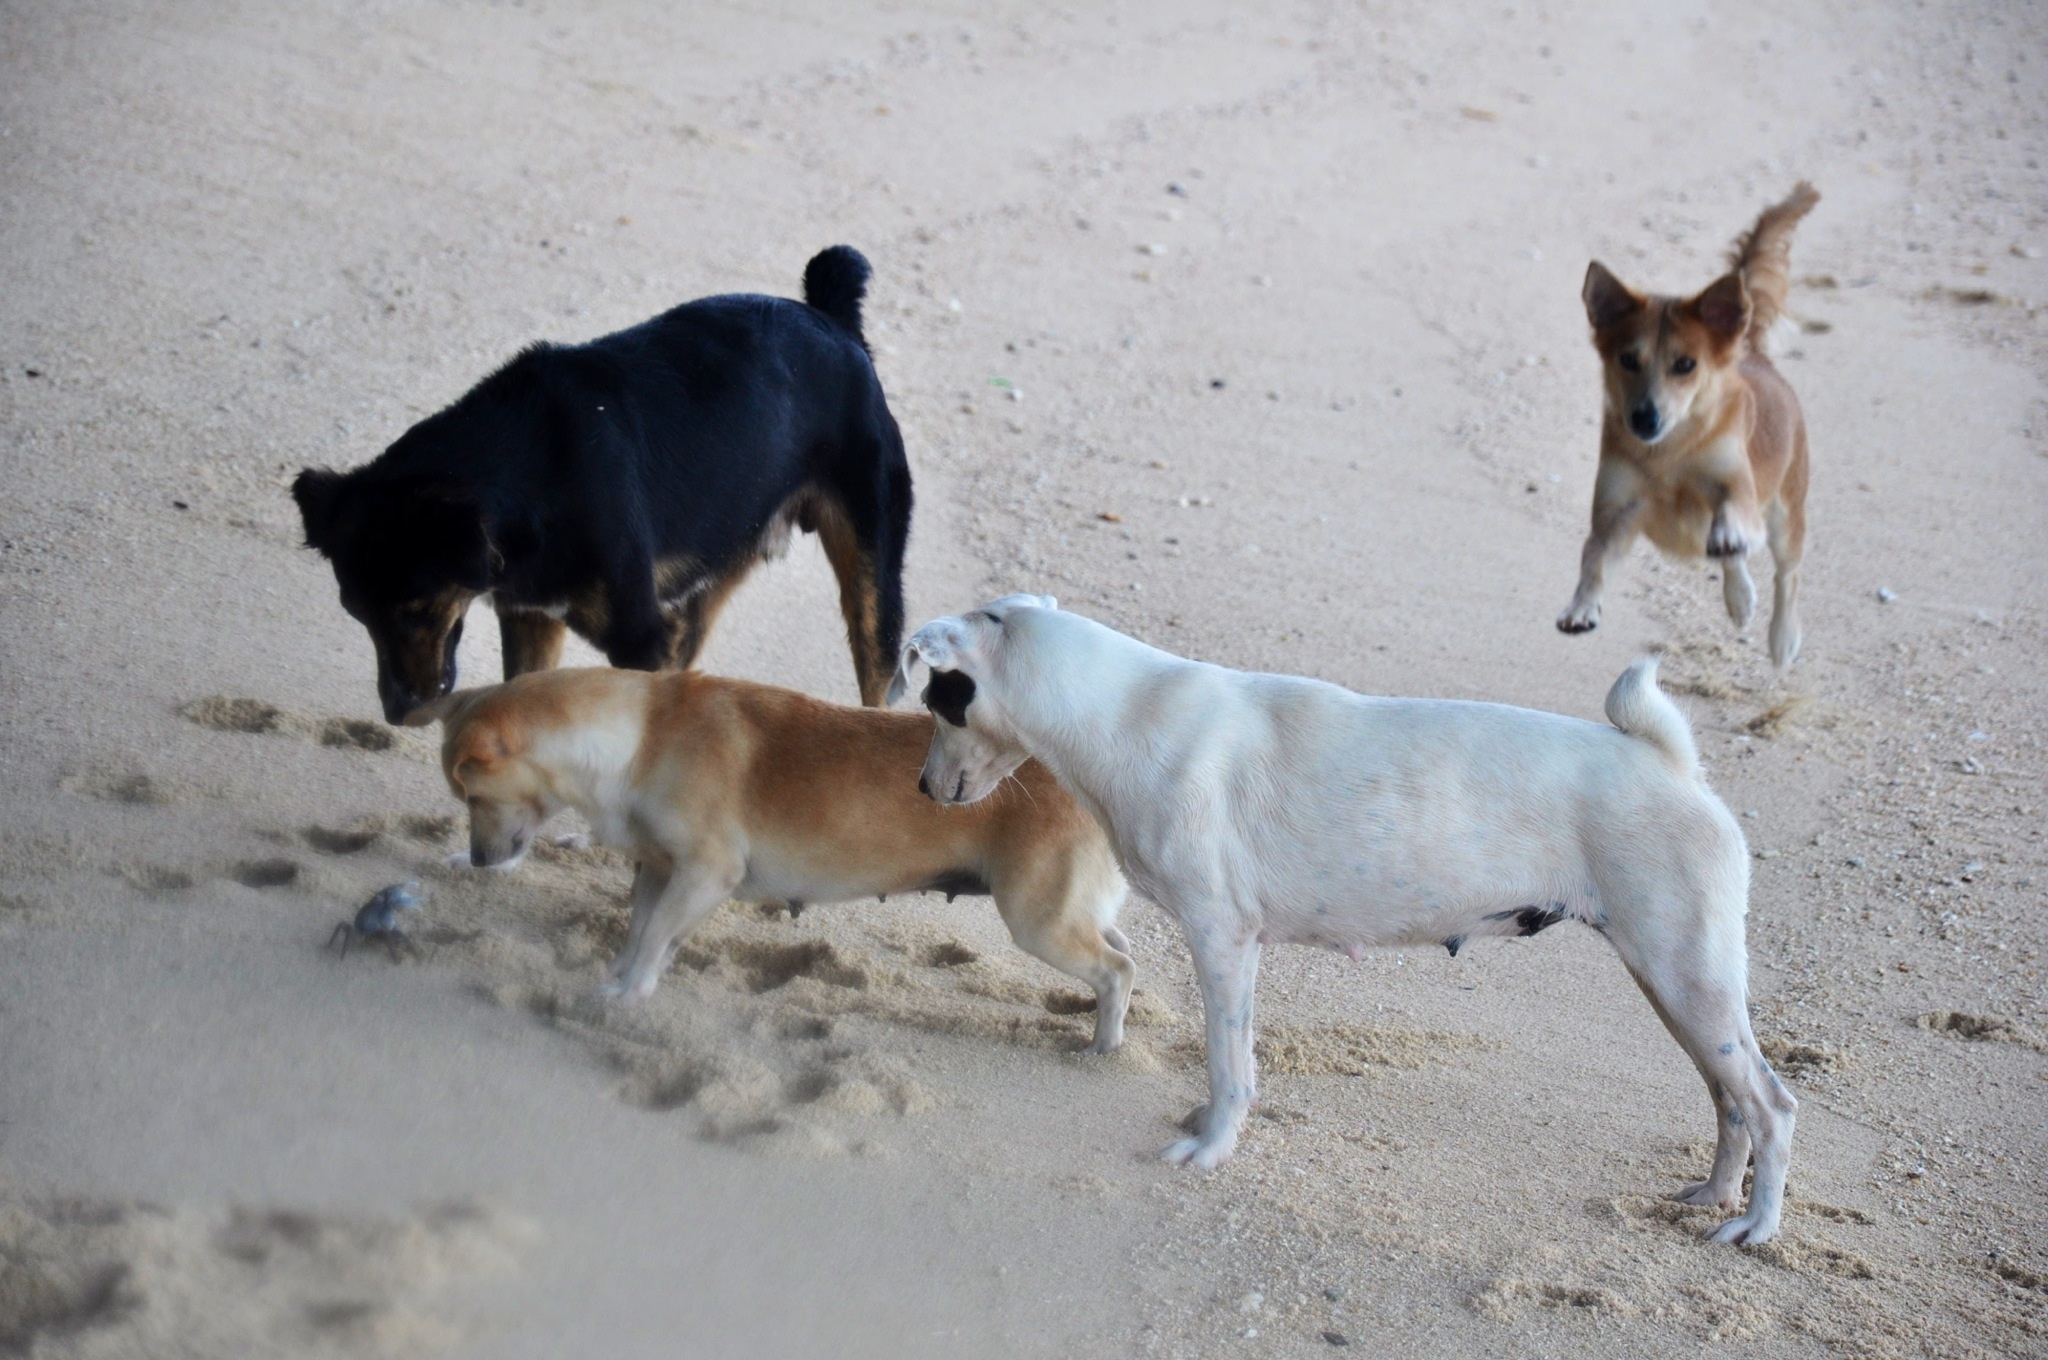 Beach dogs giving me a special welcome on Anse Union